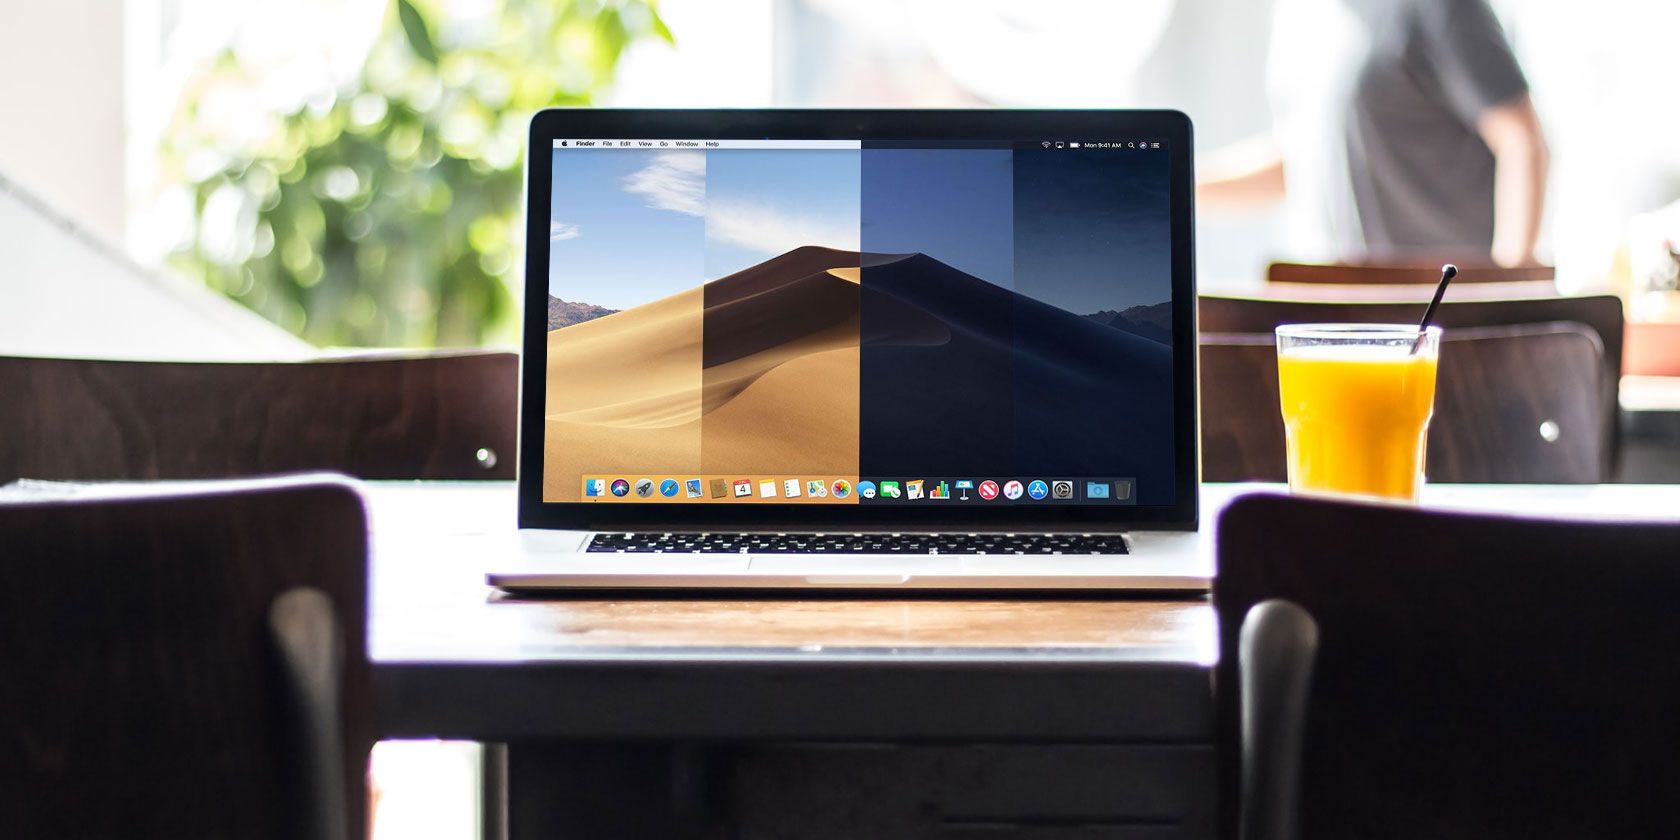 The 3 Best Mac Dynamic Wallpaper Sites (And How to Make Your Own)